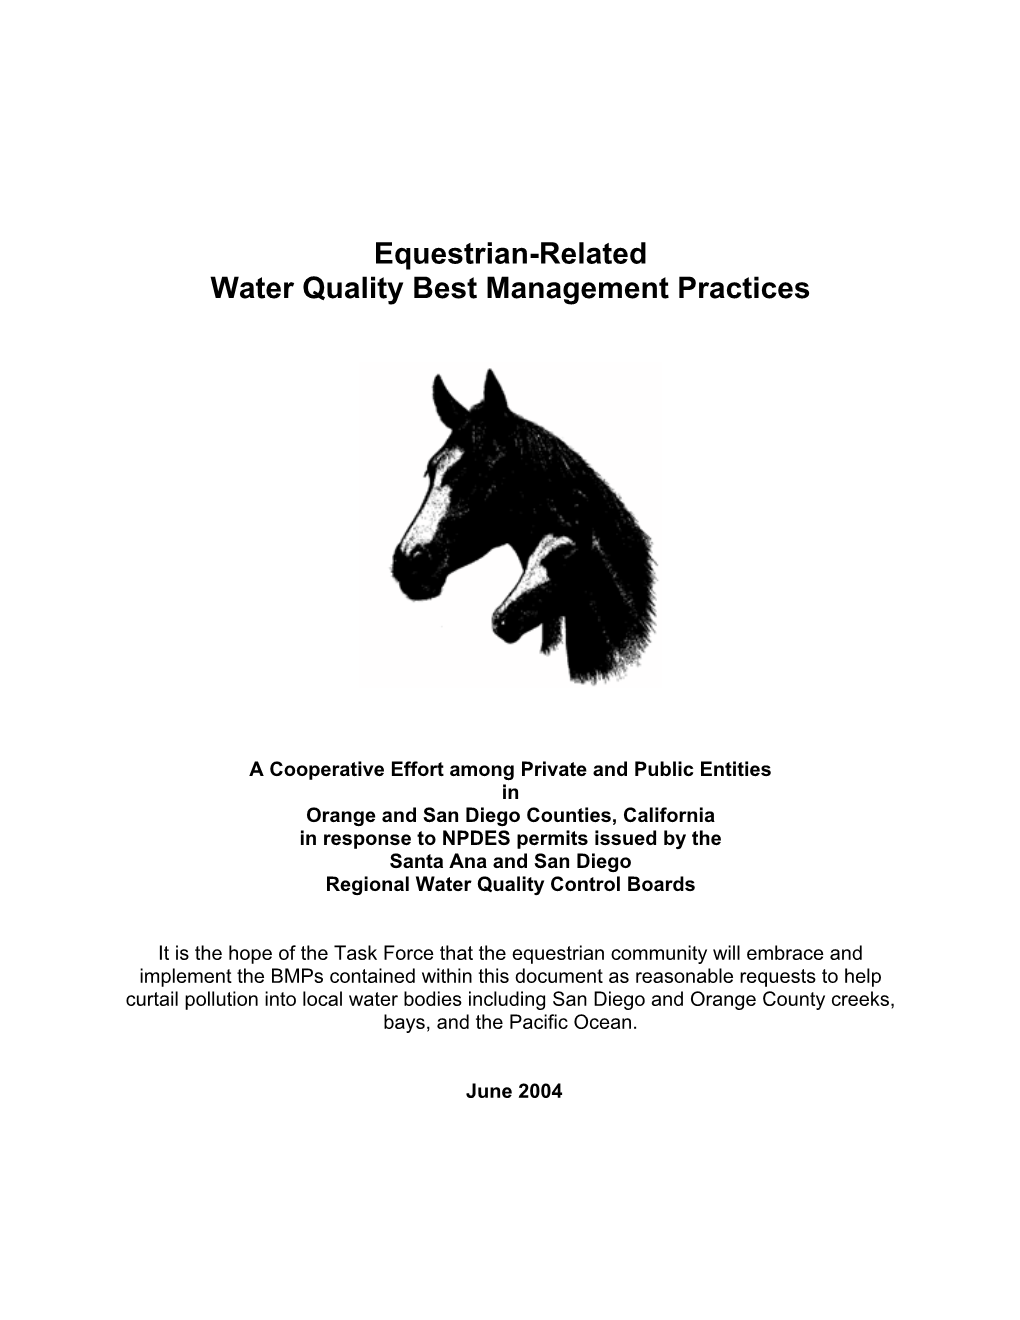 Equestrian-Related Water Quality Best Management Practices